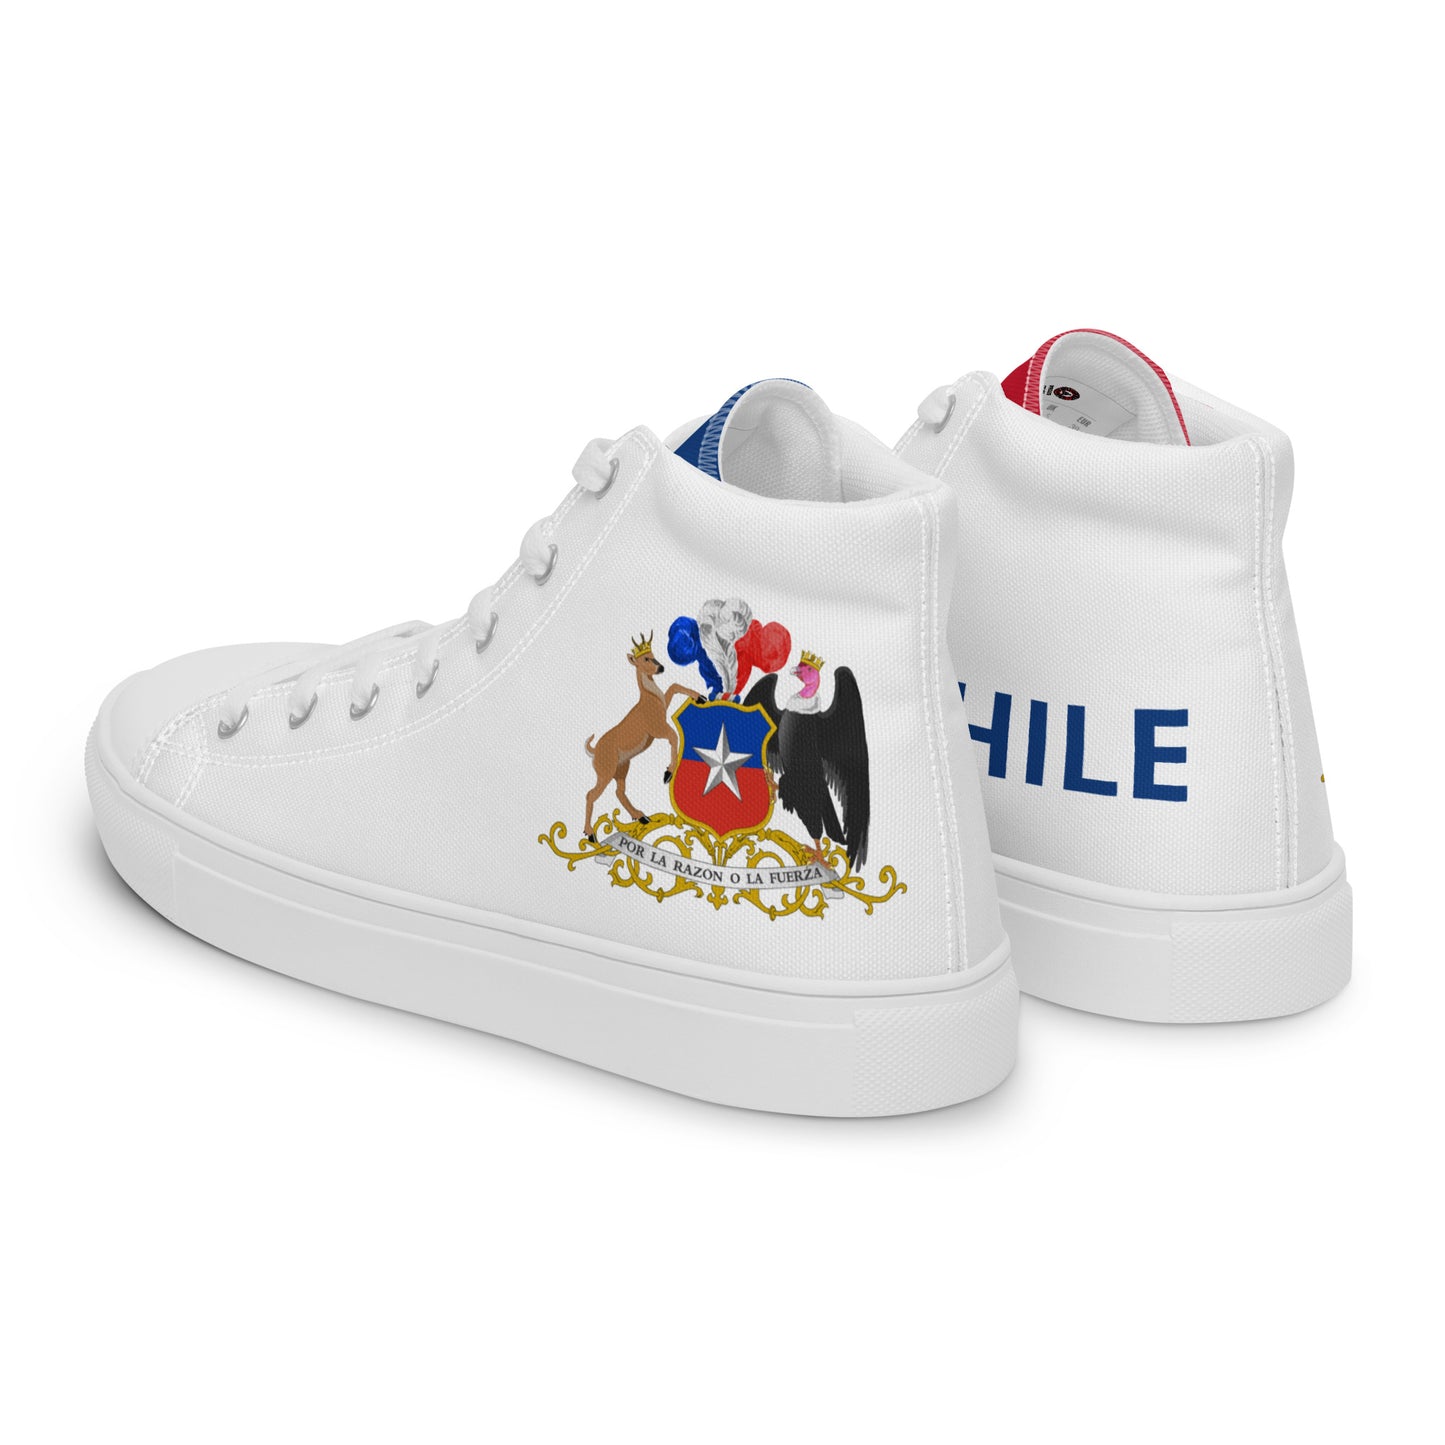 Chile - Women - White - High top shoes